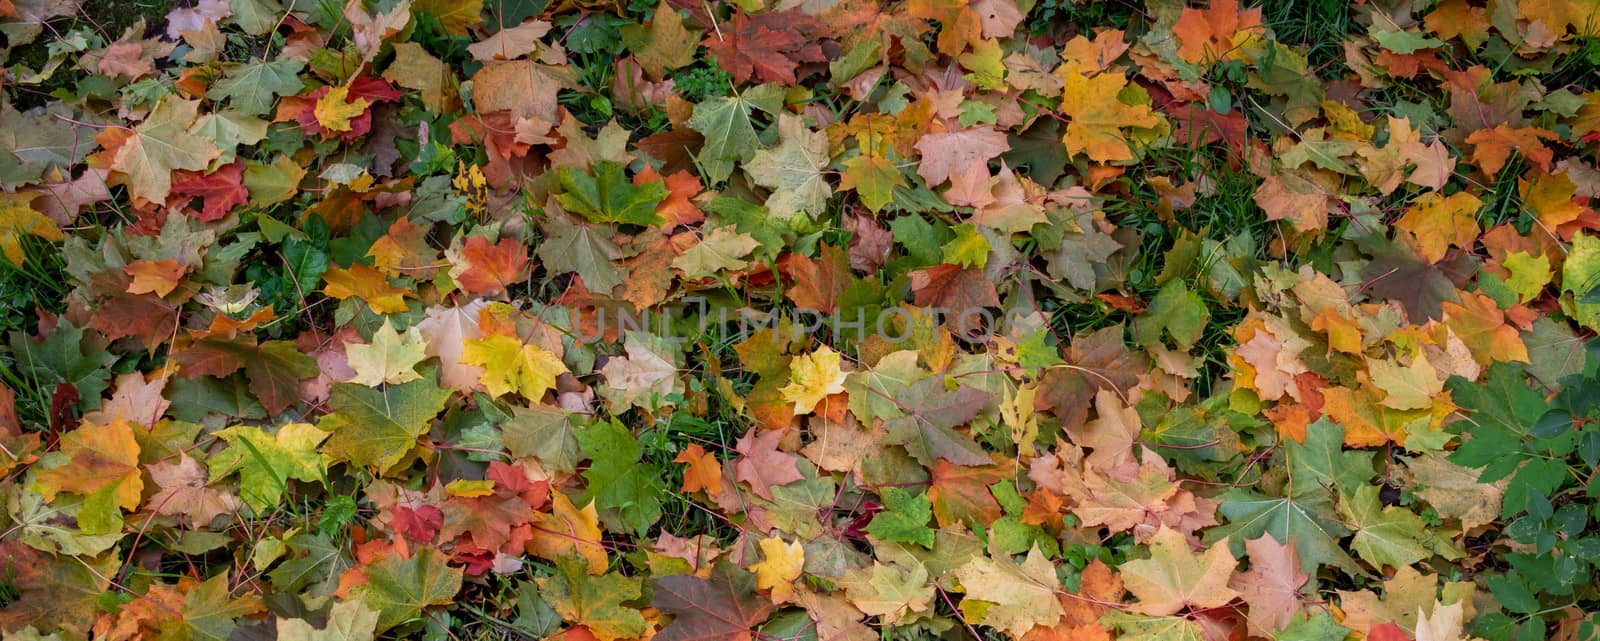 Panorama of autumn leaves. Yellow, orange and red September autumn maple leaves on the ground in a beautiful autumn Park.